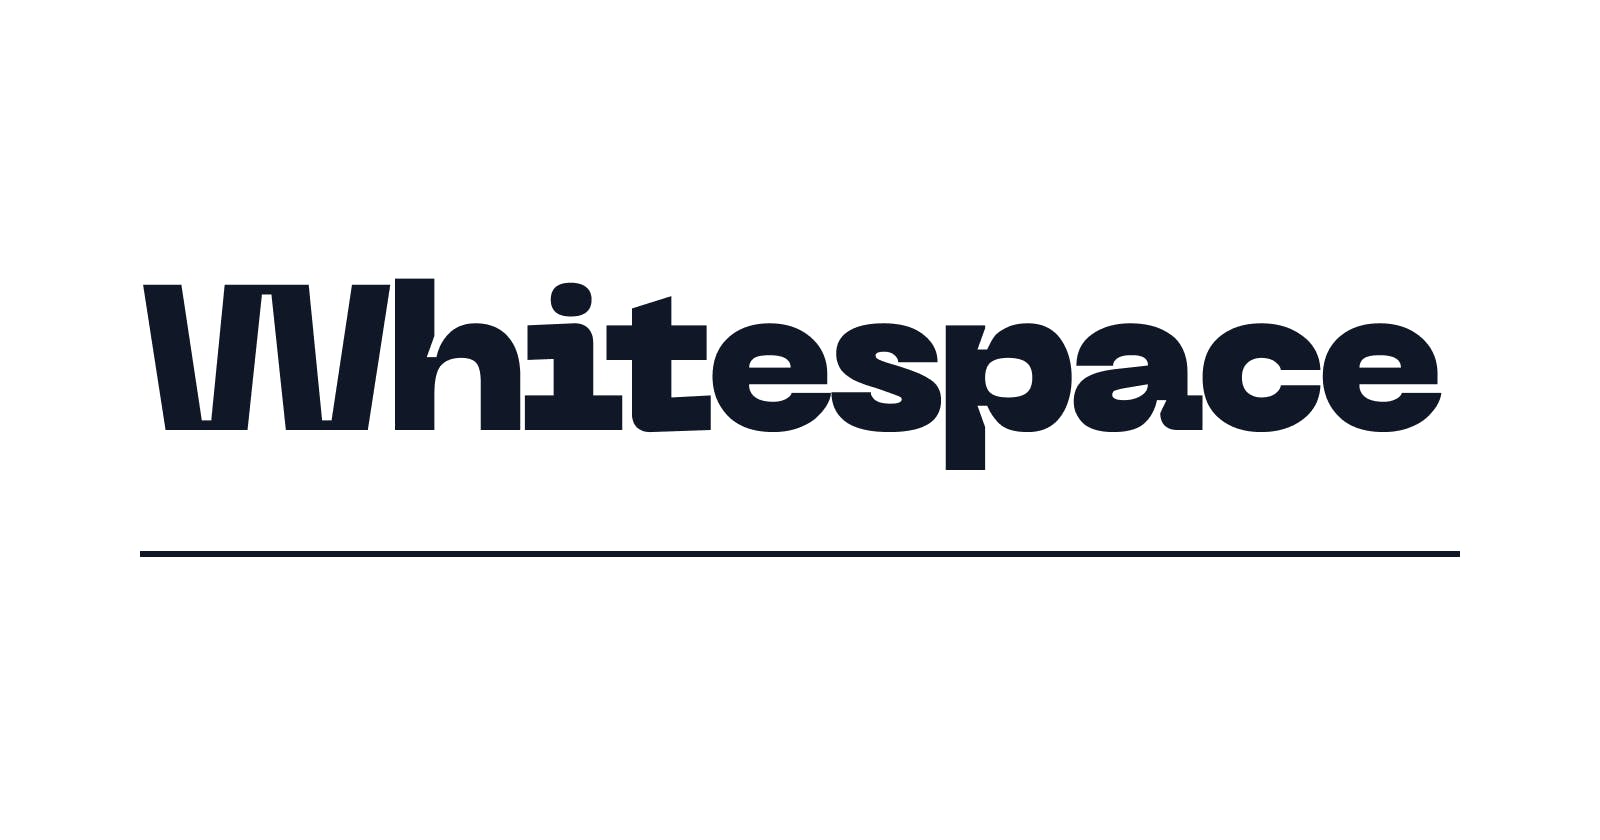 Whitespace: Why it shouldn't be undervalued